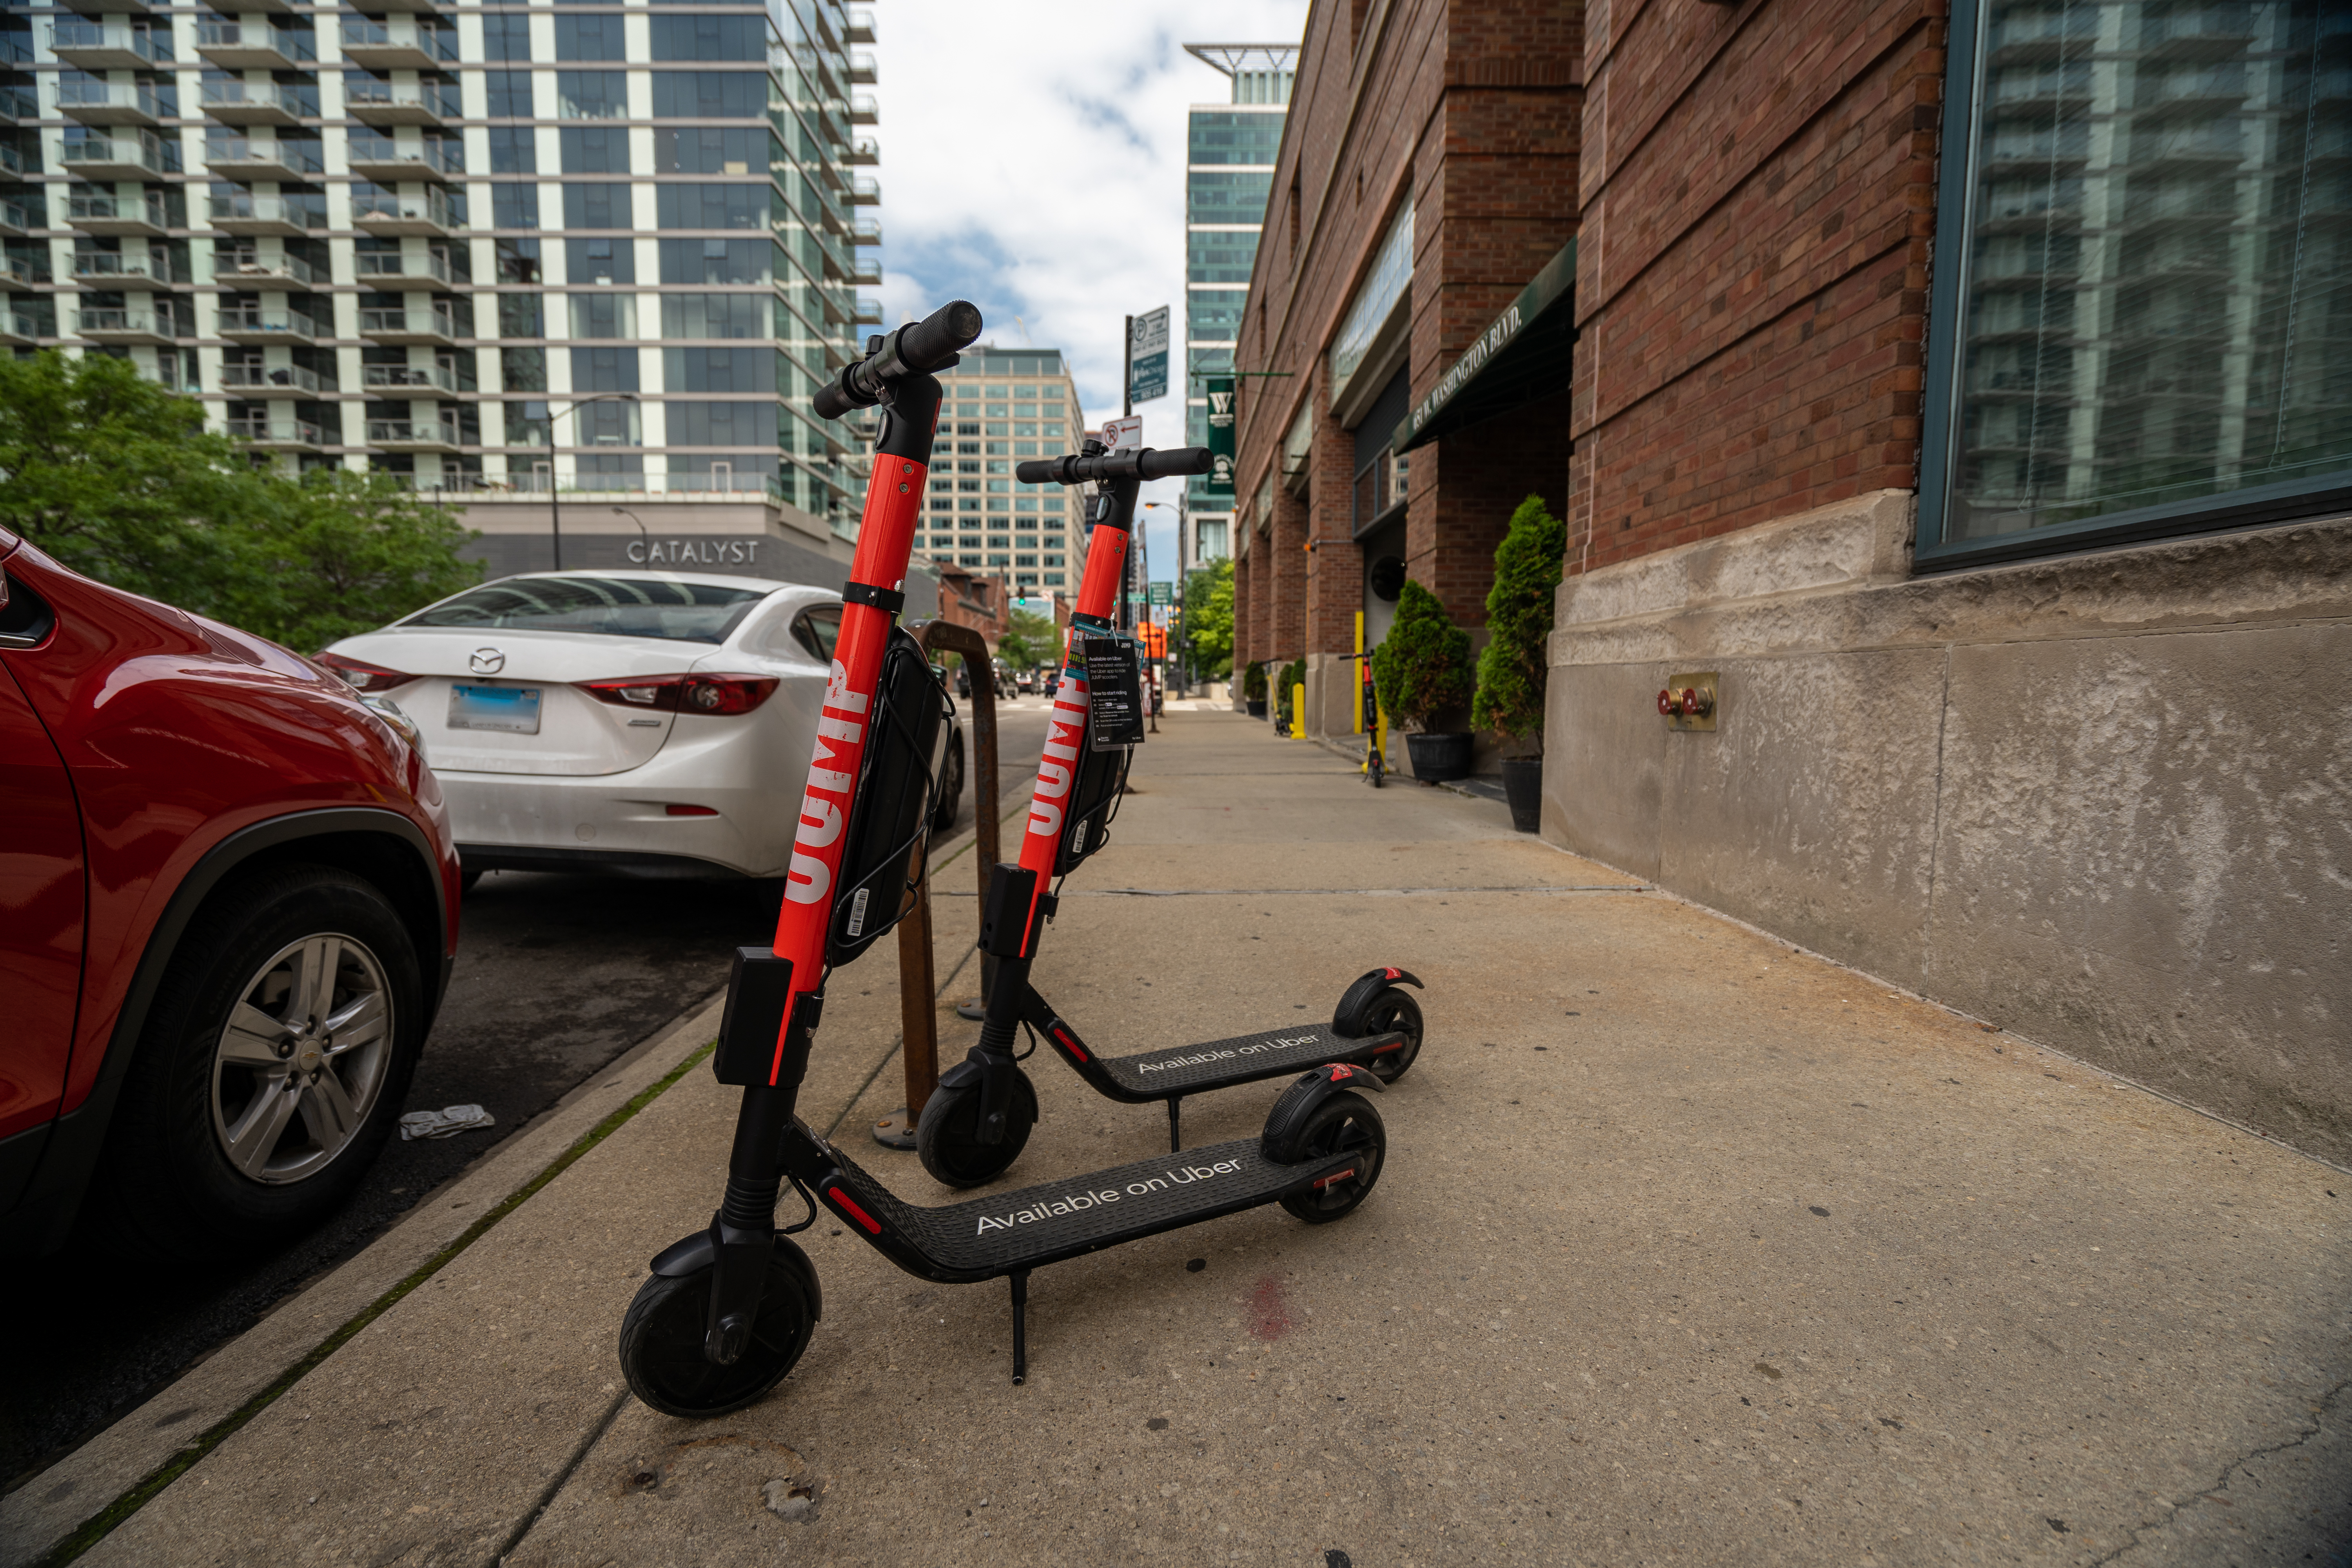 Two scooters parked on a sidewalk next to a brick building and two parked cars. 